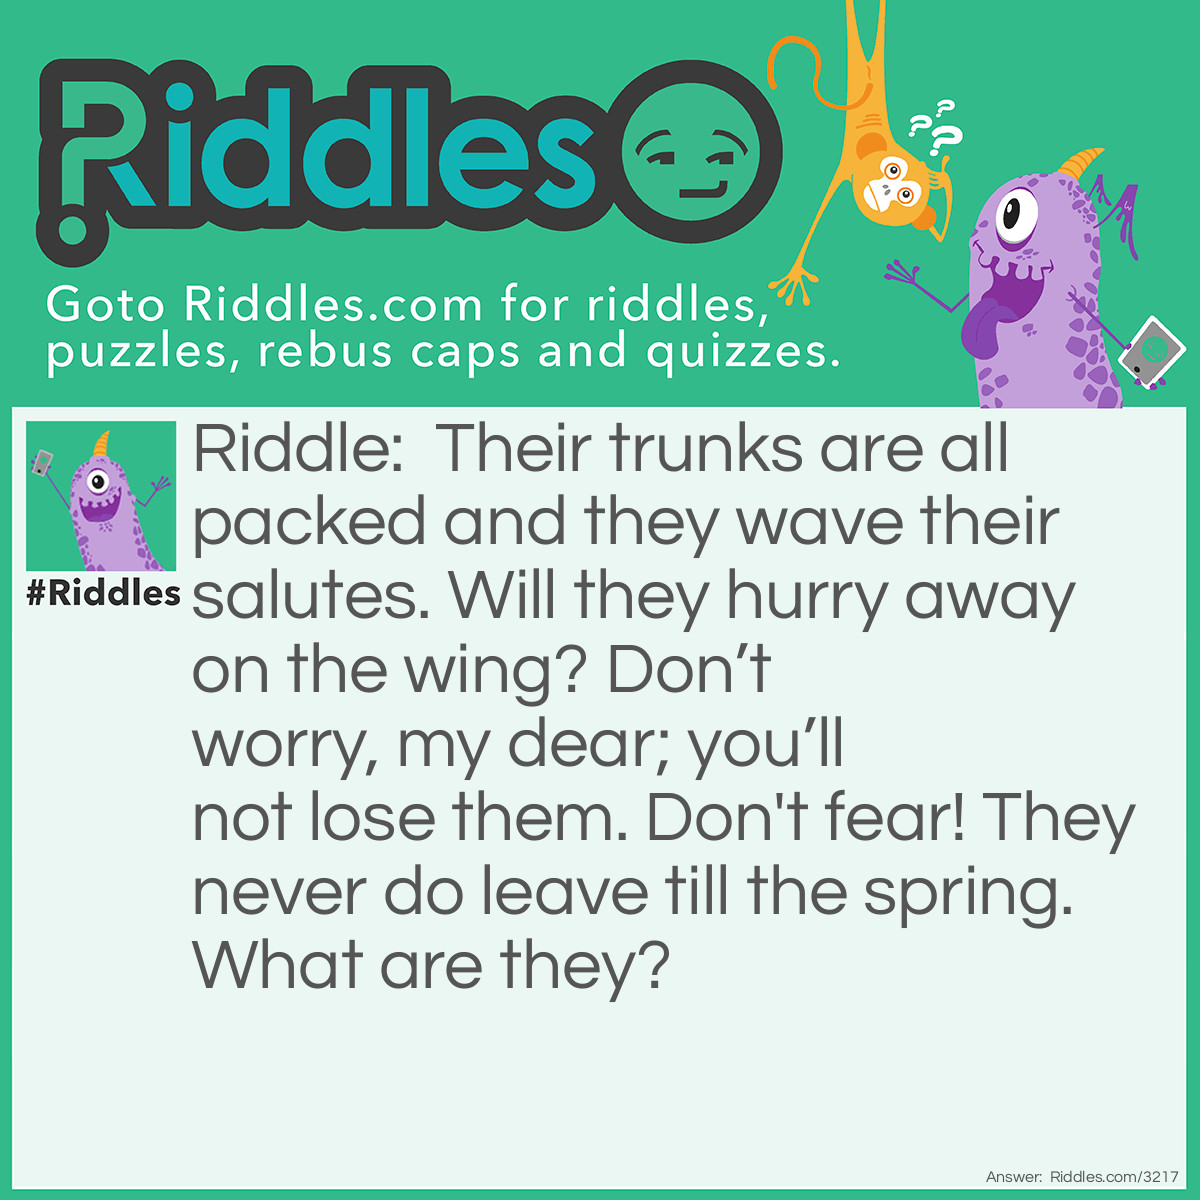 Riddle: Their trunks are all packed and they wave their salutes. Will they hurry away on the wing? Don’t worry, my dear; you’ll not lose them. Don't fear! They never do leave till the spring. What are they? Answer: Trees.